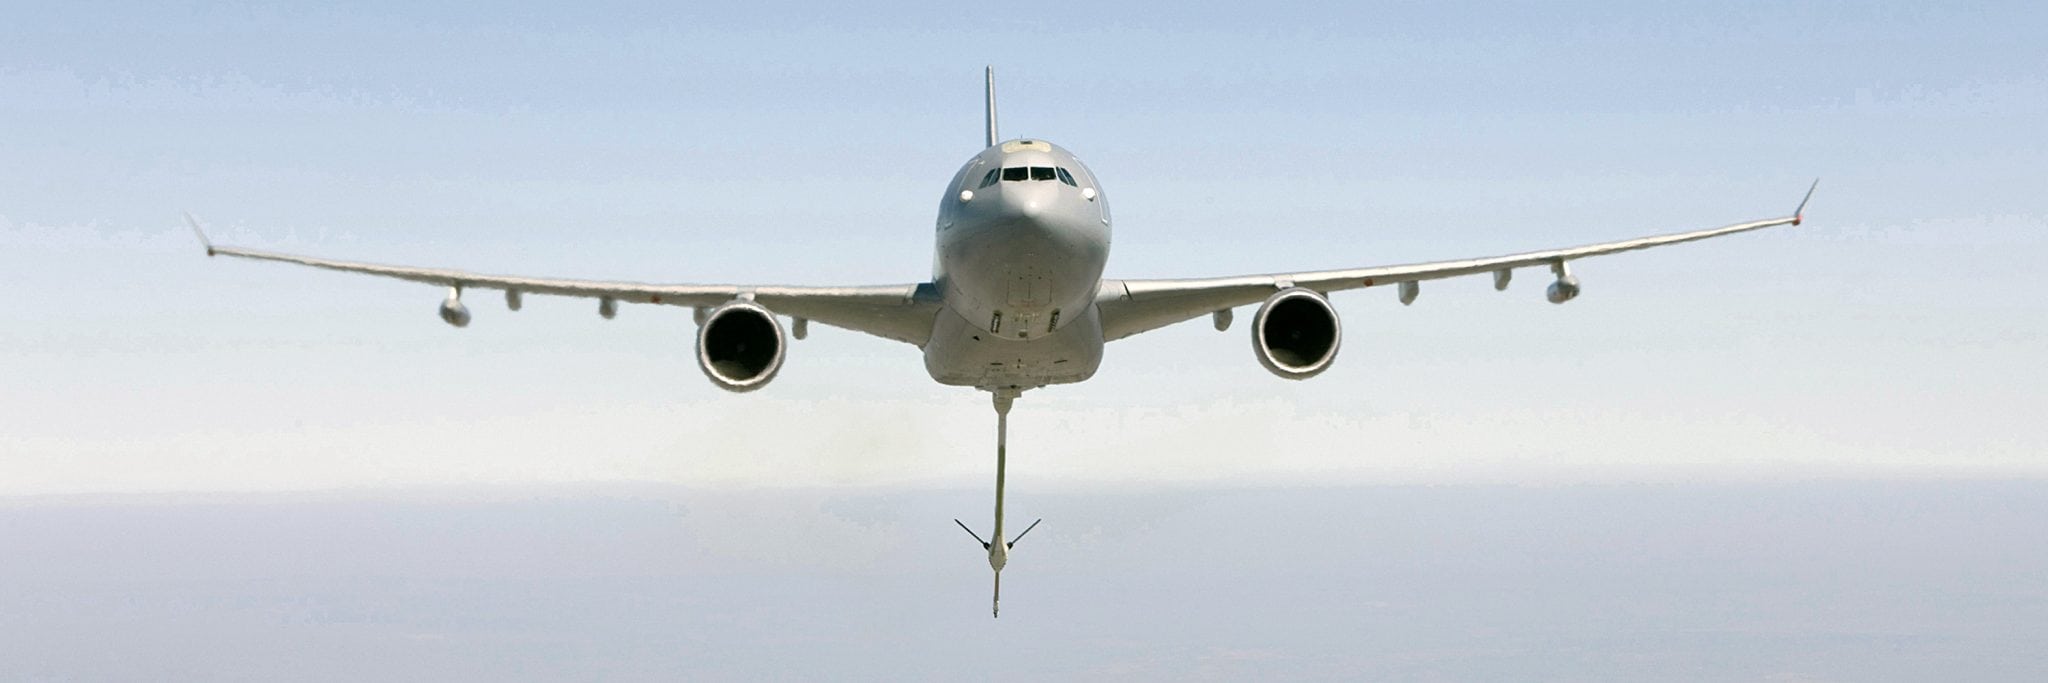 A330 MRTT multirole transport and air-to-air refueling aircraft